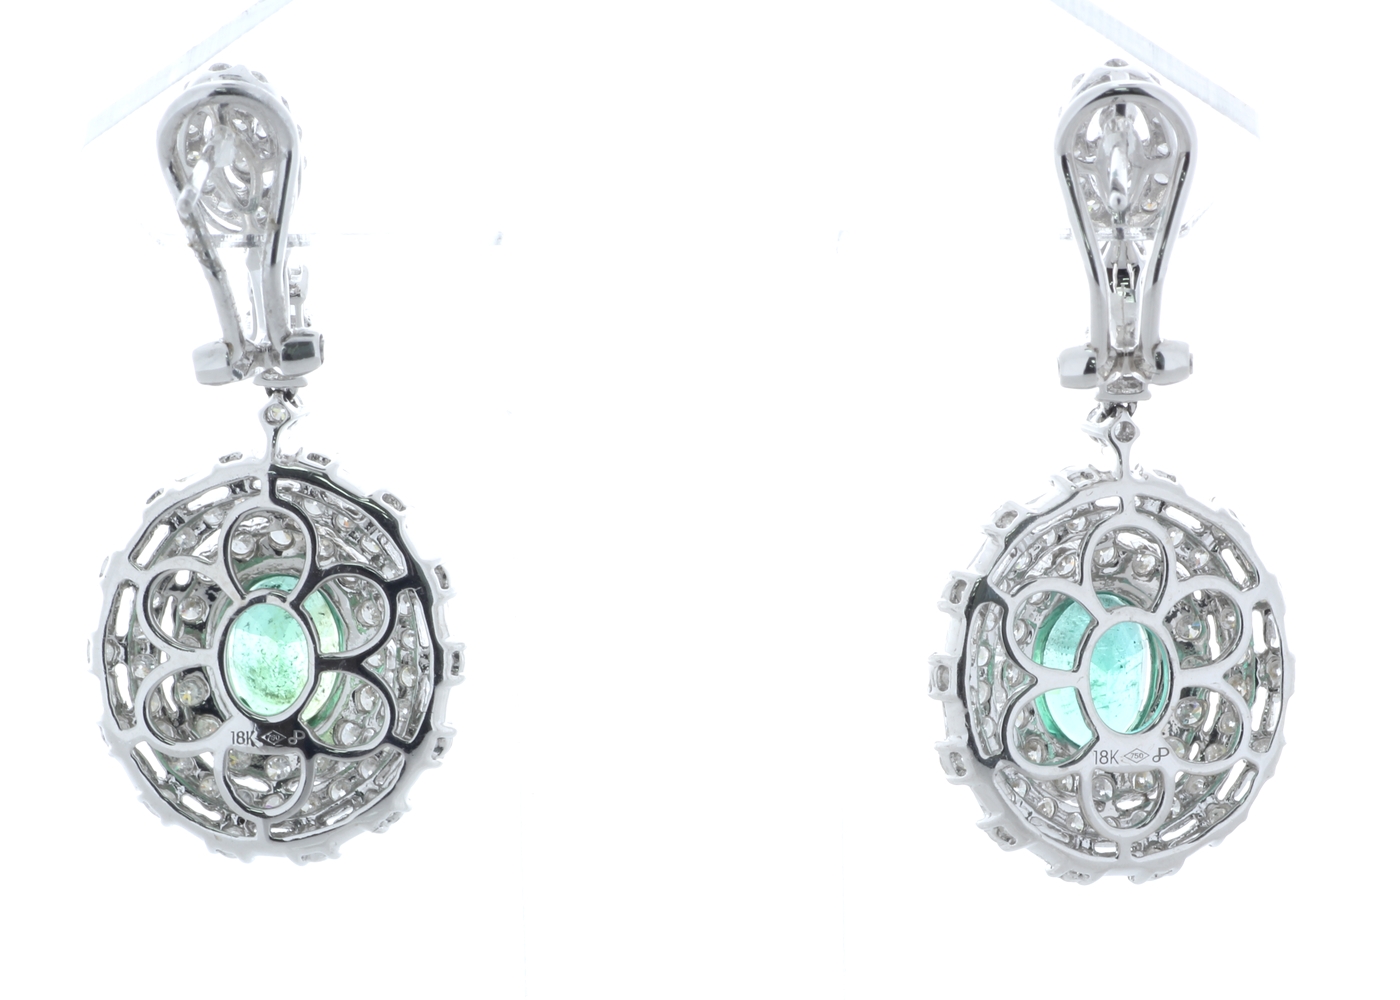 18ct White Gold Diamond And Emerald Drop Earrings (E2.61) 3.74 Carats - Image 3 of 5